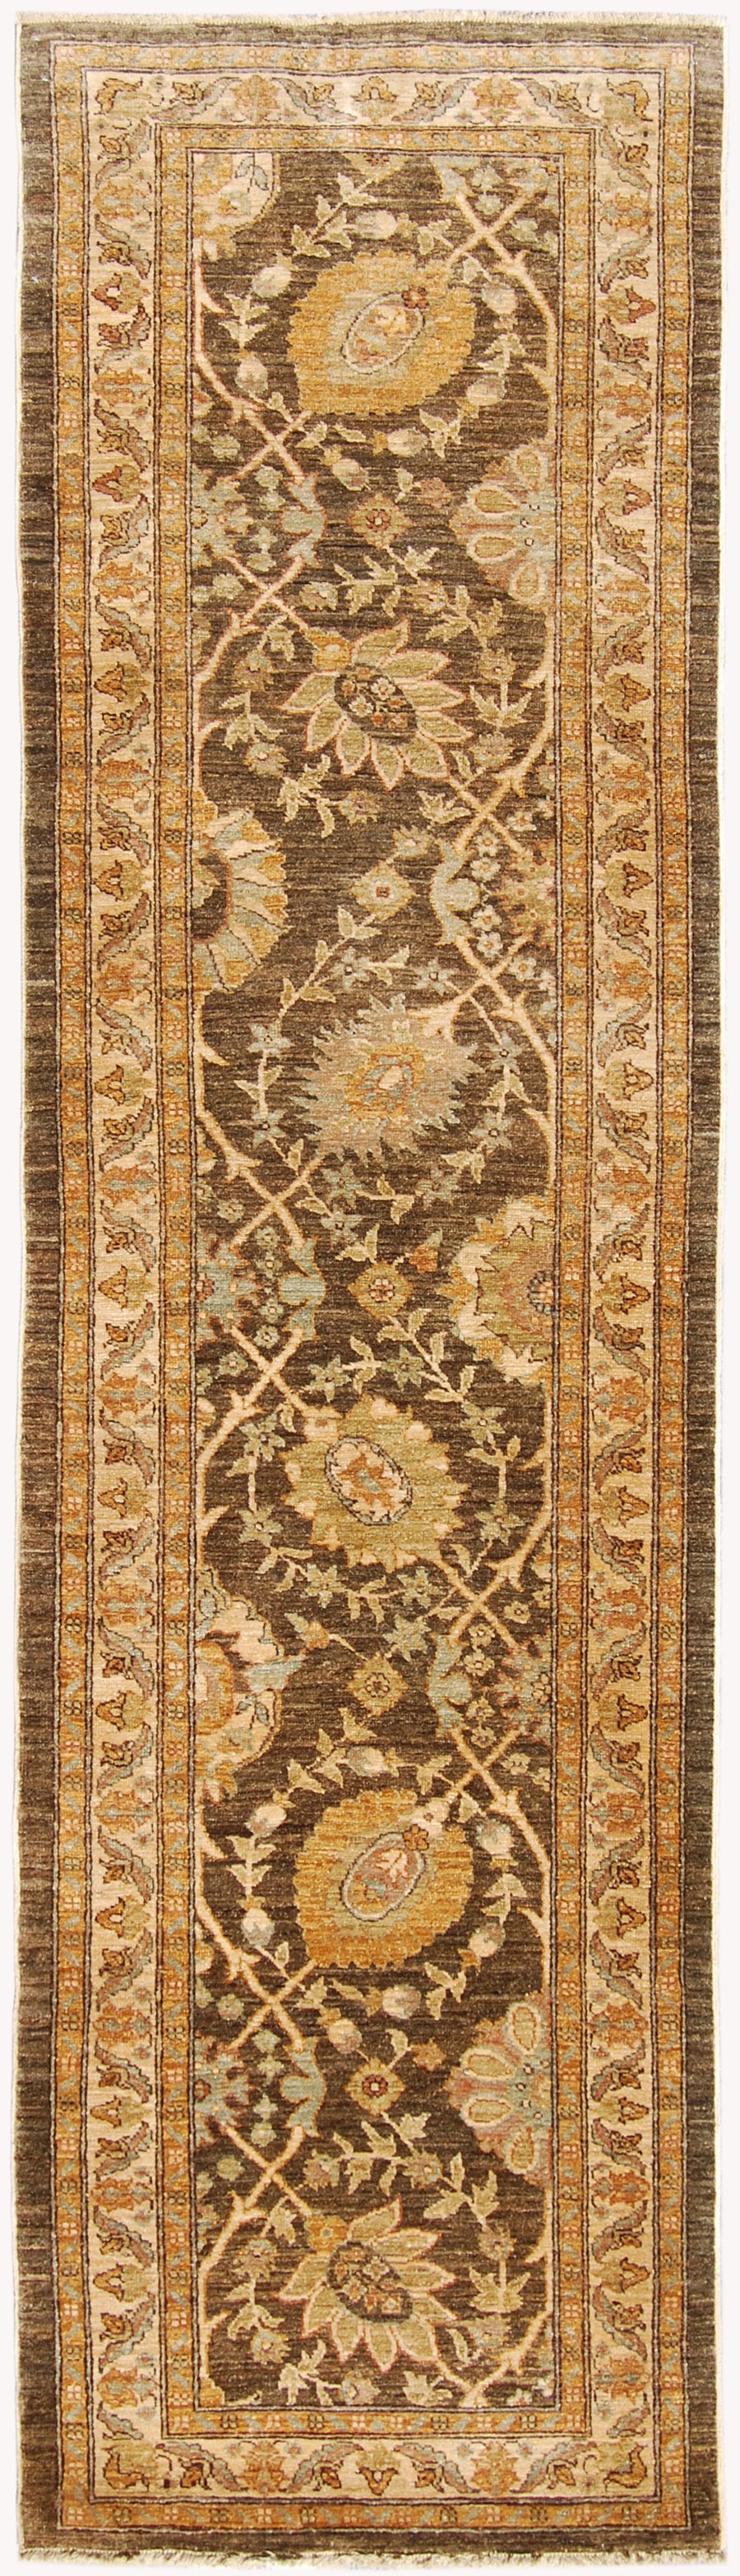 3x10 Brown Gold Tabriz Design Hand-Knotted Ariana Traditional Area Runner Rug